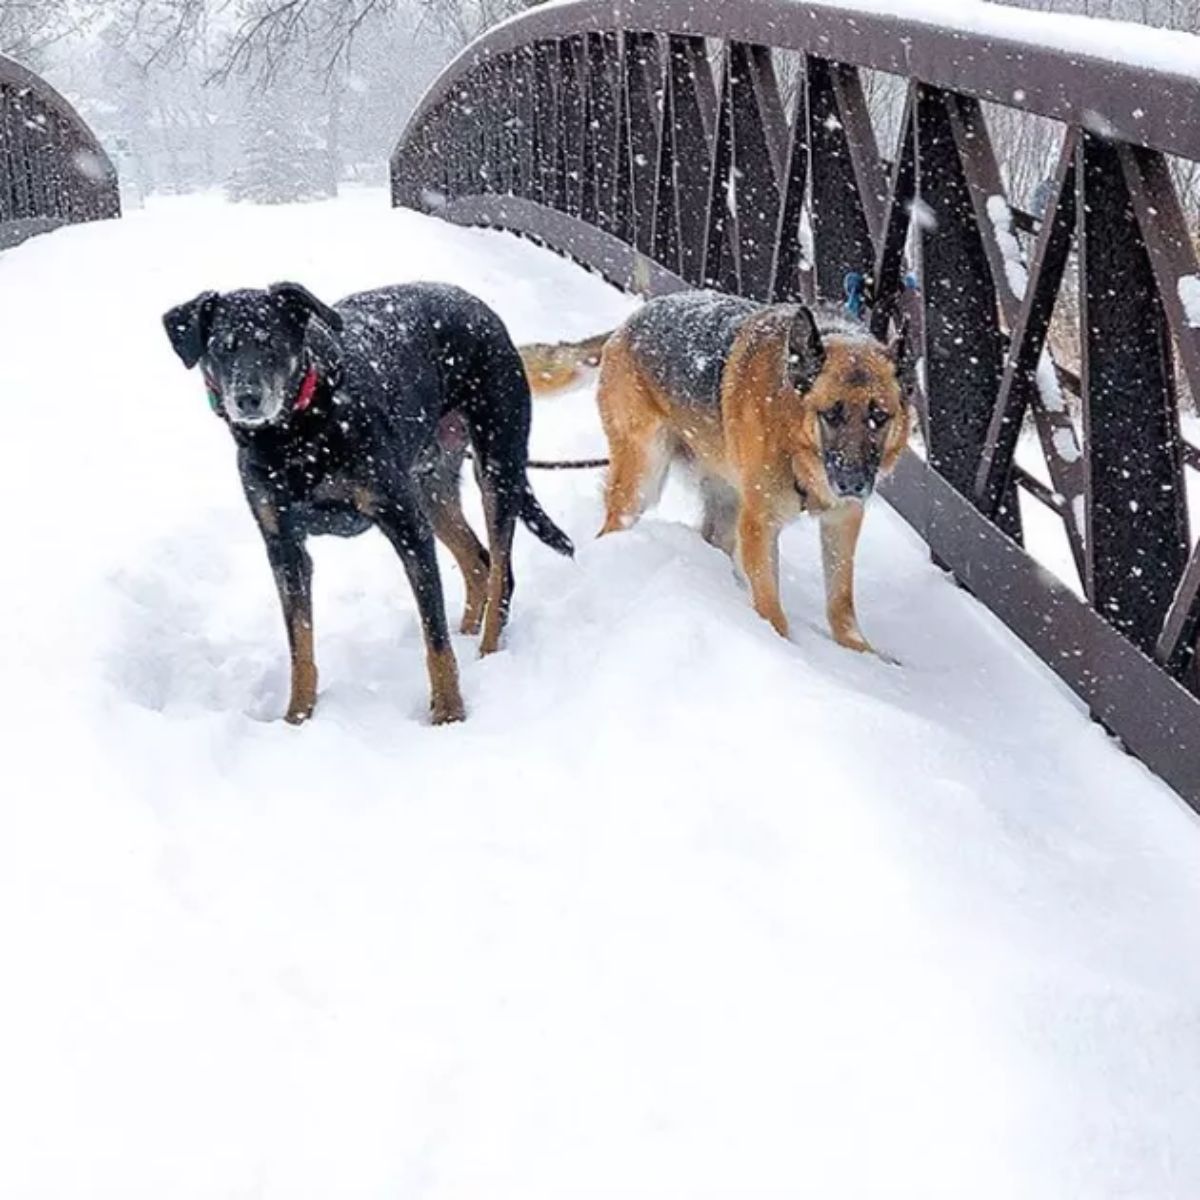 black and brown dog and german shepherd standing in snow